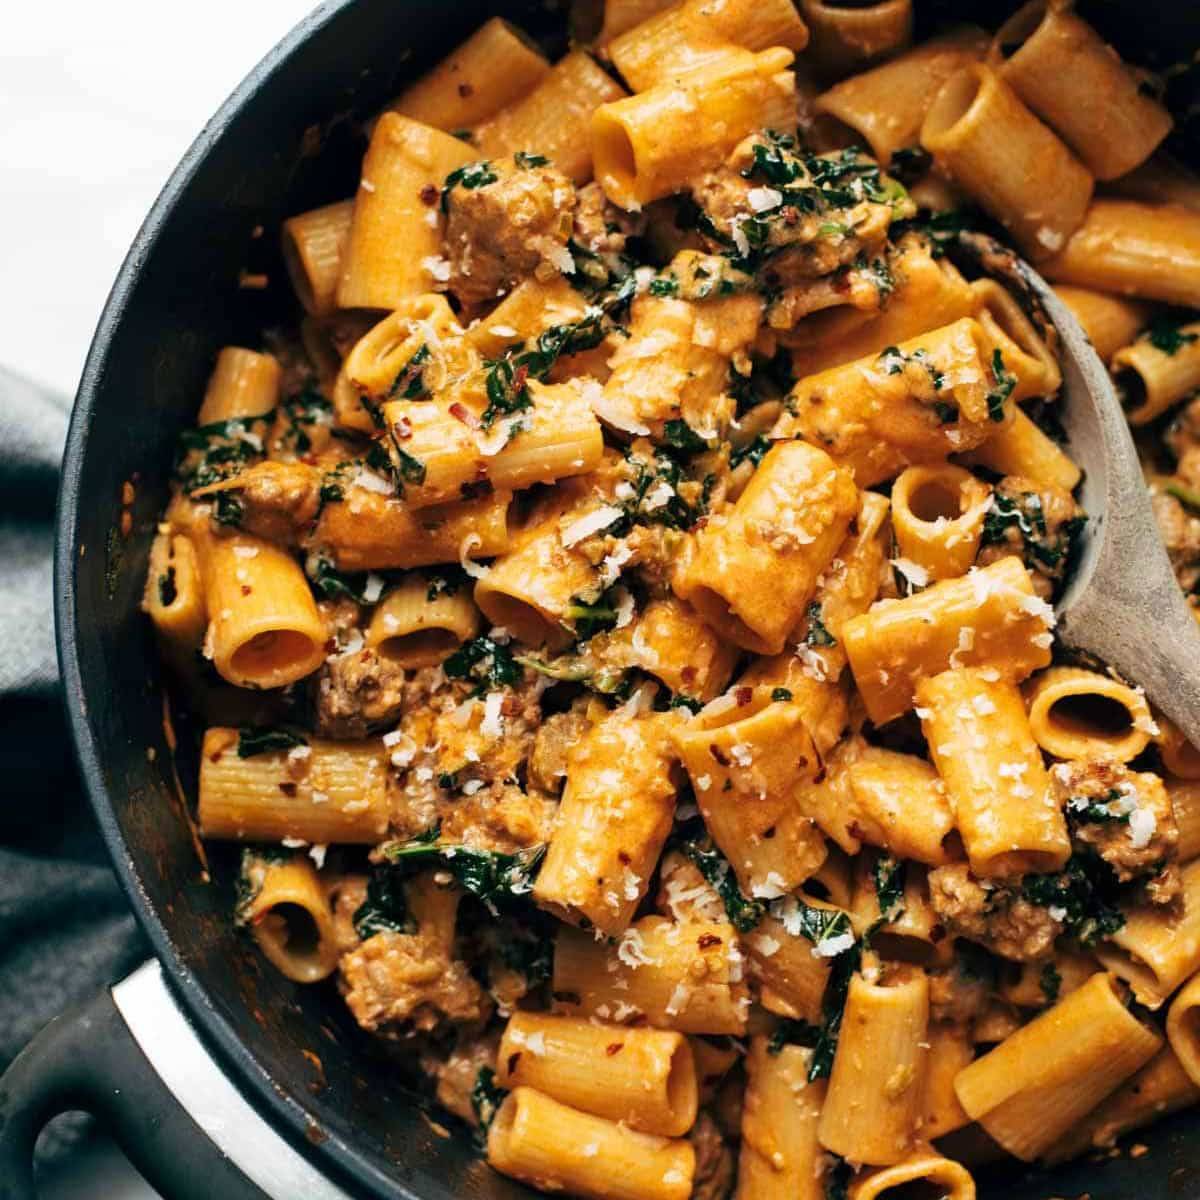 A bowl filled of Rigatoni with Sausage and Kale with a wooden spoon over it.